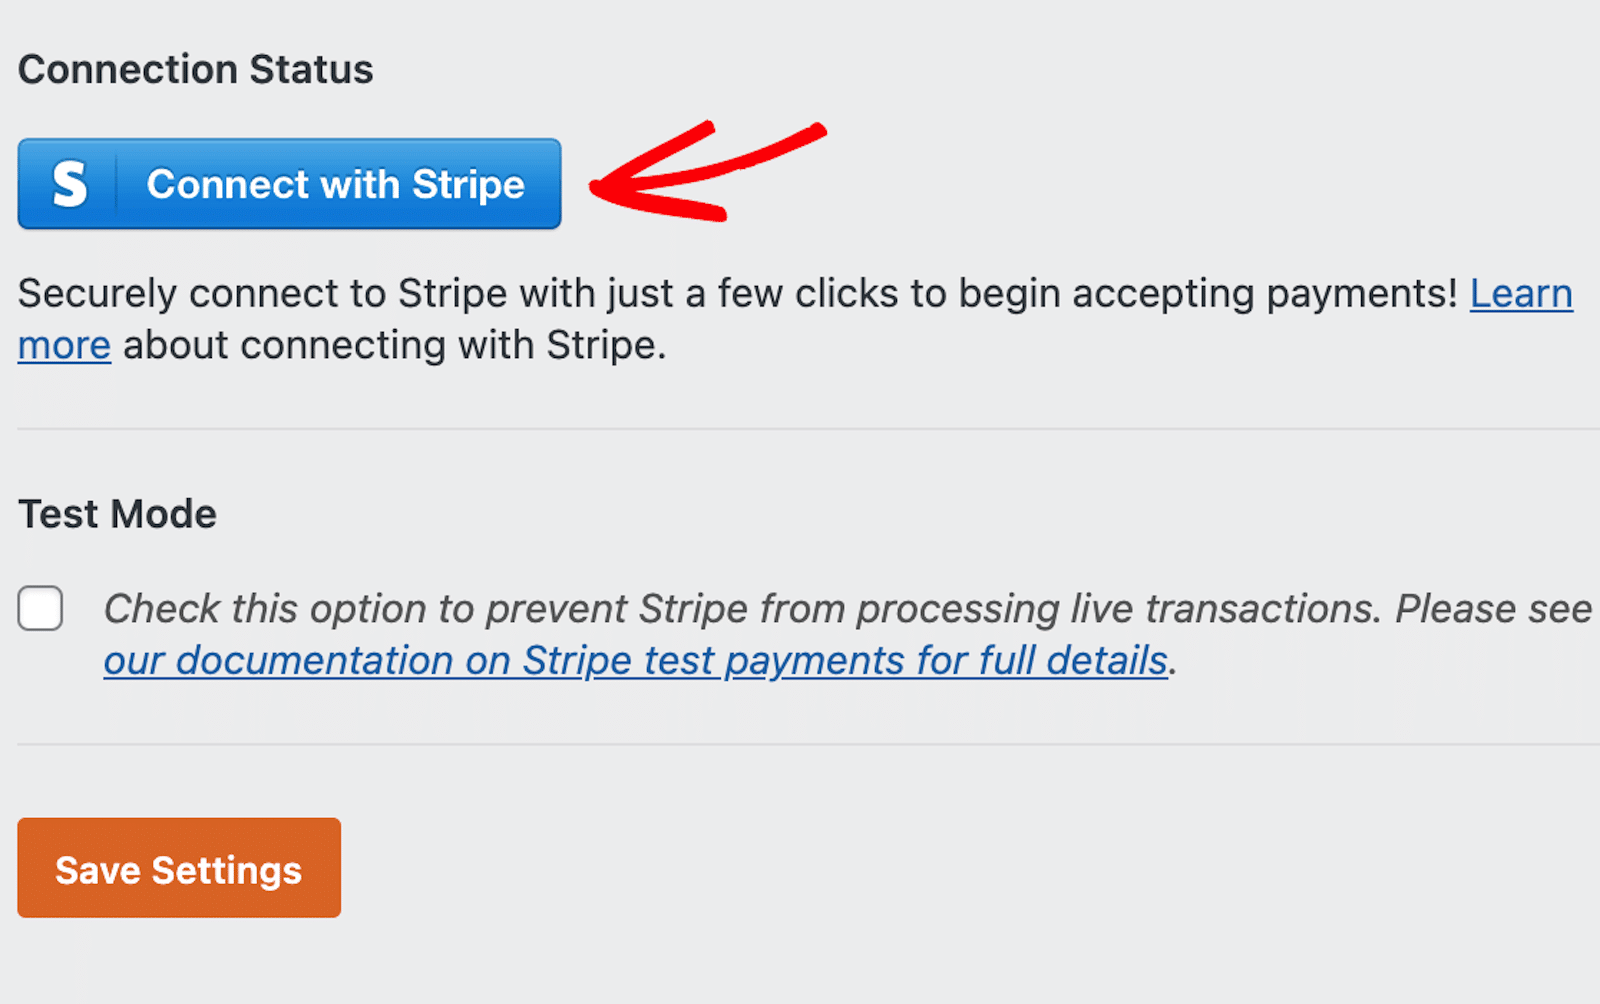 Connecting to the Stripe payment gateway